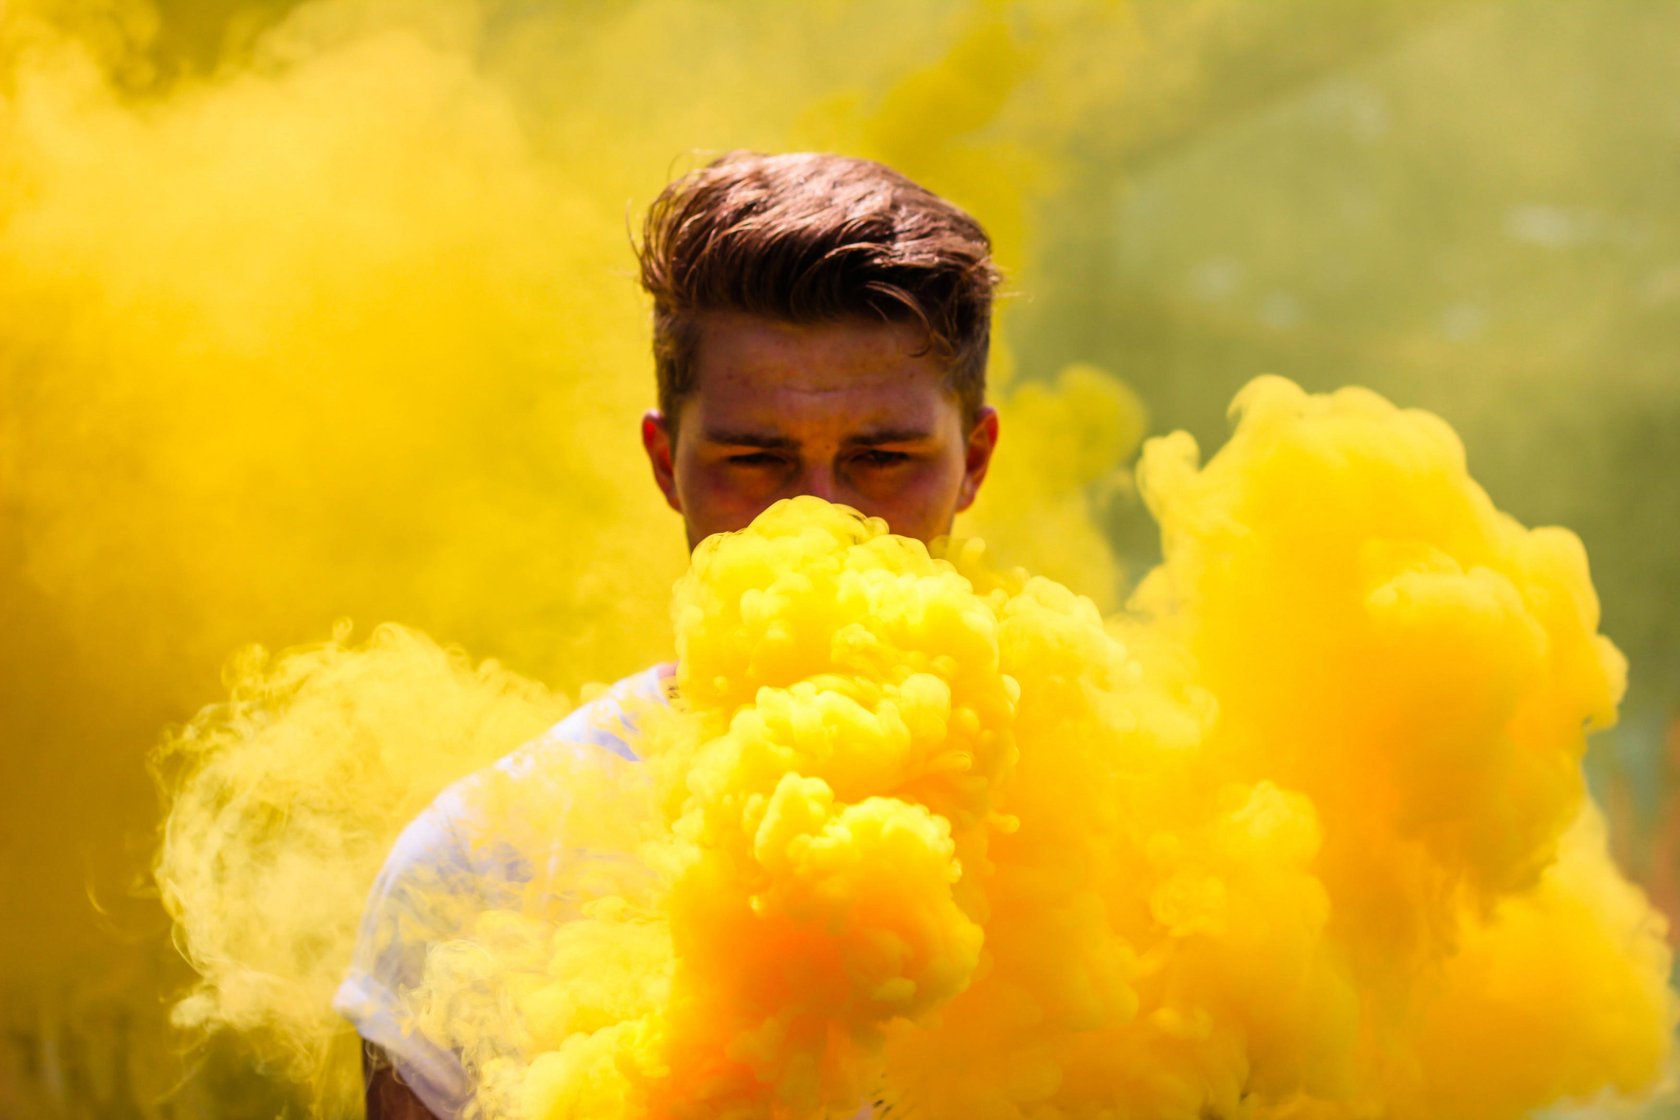 Smoke Bomb Photography You Can Master Quickly and Easily Image7